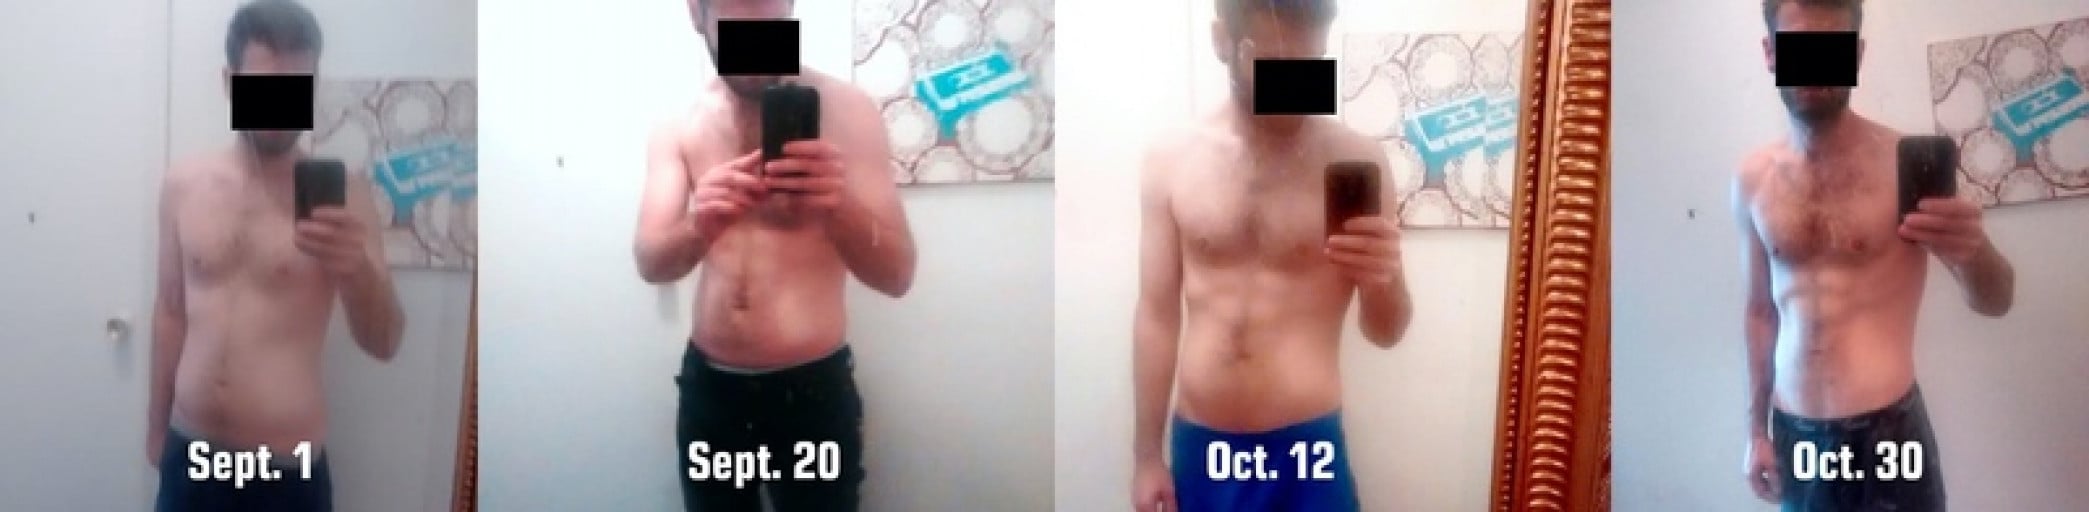 From 154Lbs to 138Lbs: a 2 Month Weight Loss Journey